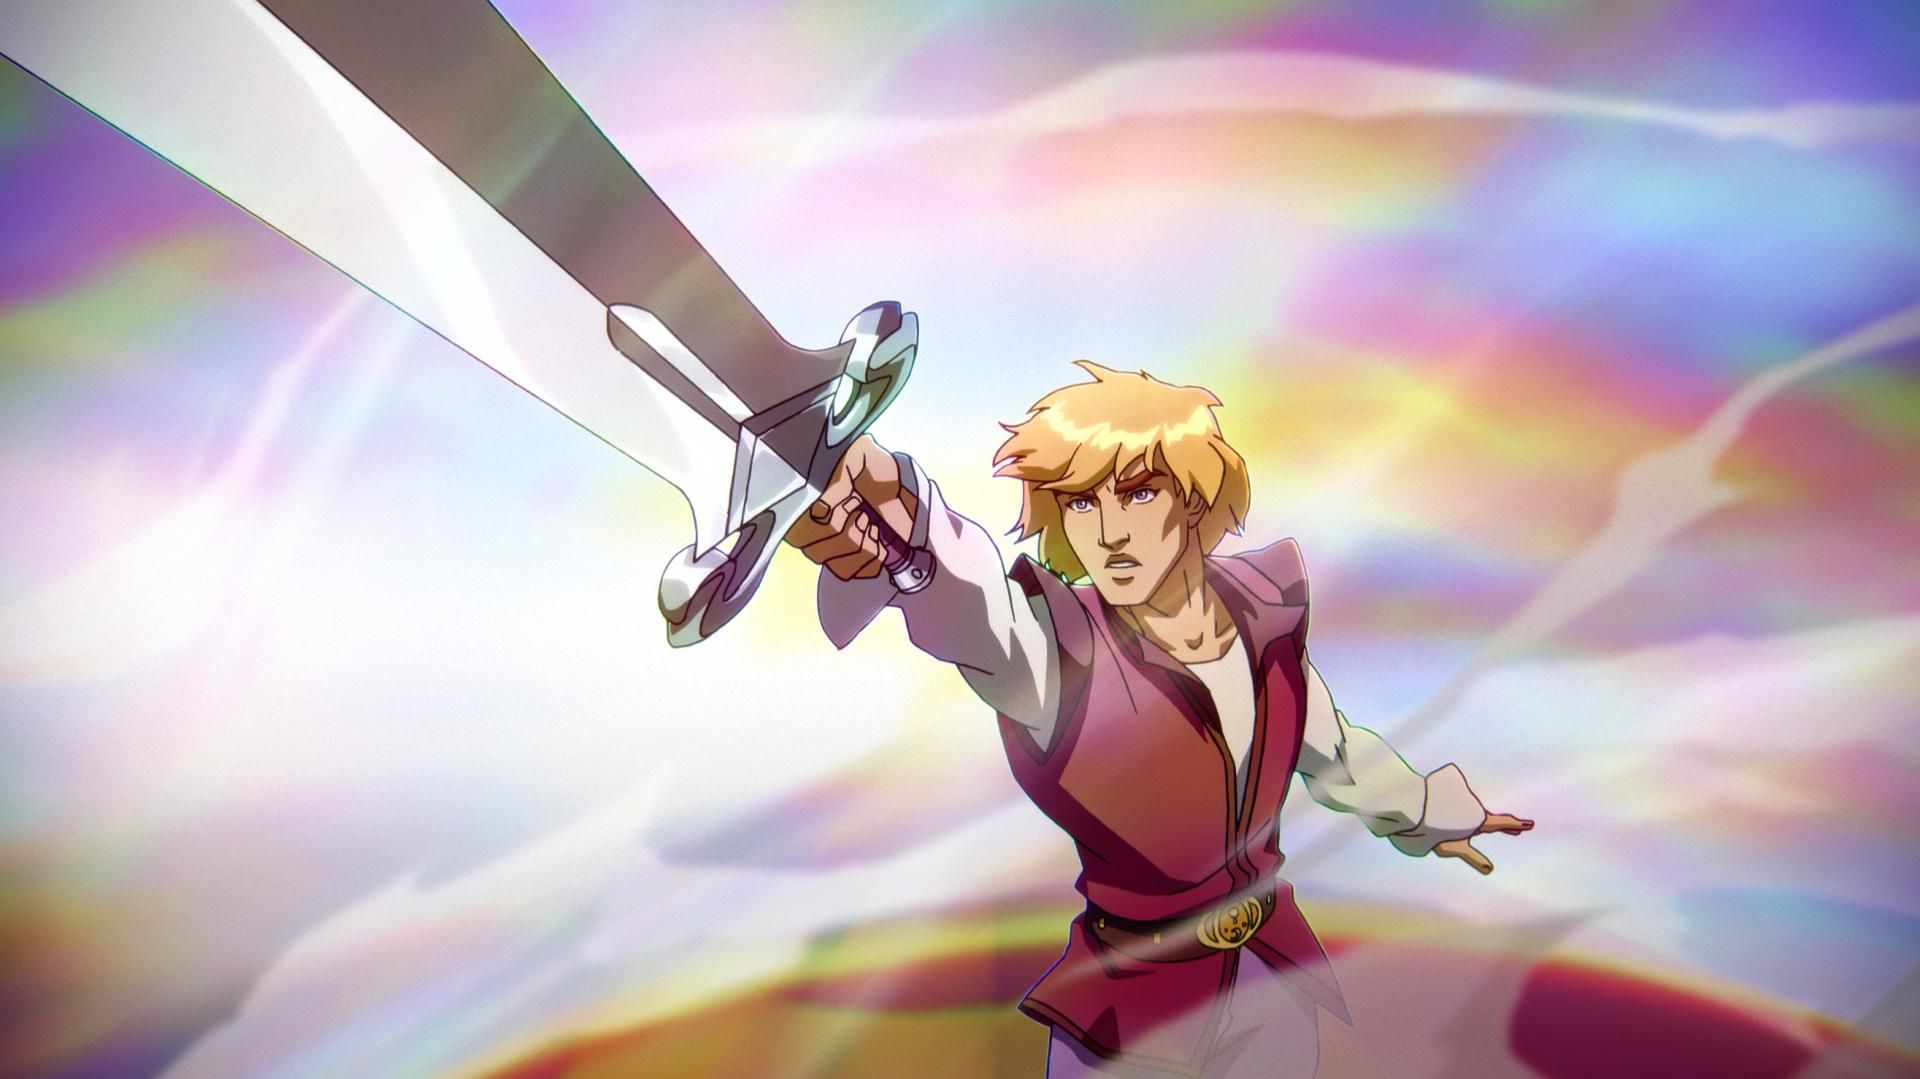 In a CG animated still from Masters of the Universe: Revelation, Prince Adam, a young light-skinned male with light-colored eyes and blonde hair, stands encircled in a multi-colored fog, silver sword raised with his right arm. He wears a white long sleeve tunic, a red vest and a brown belt with a golden belt buckle cinching his waist.